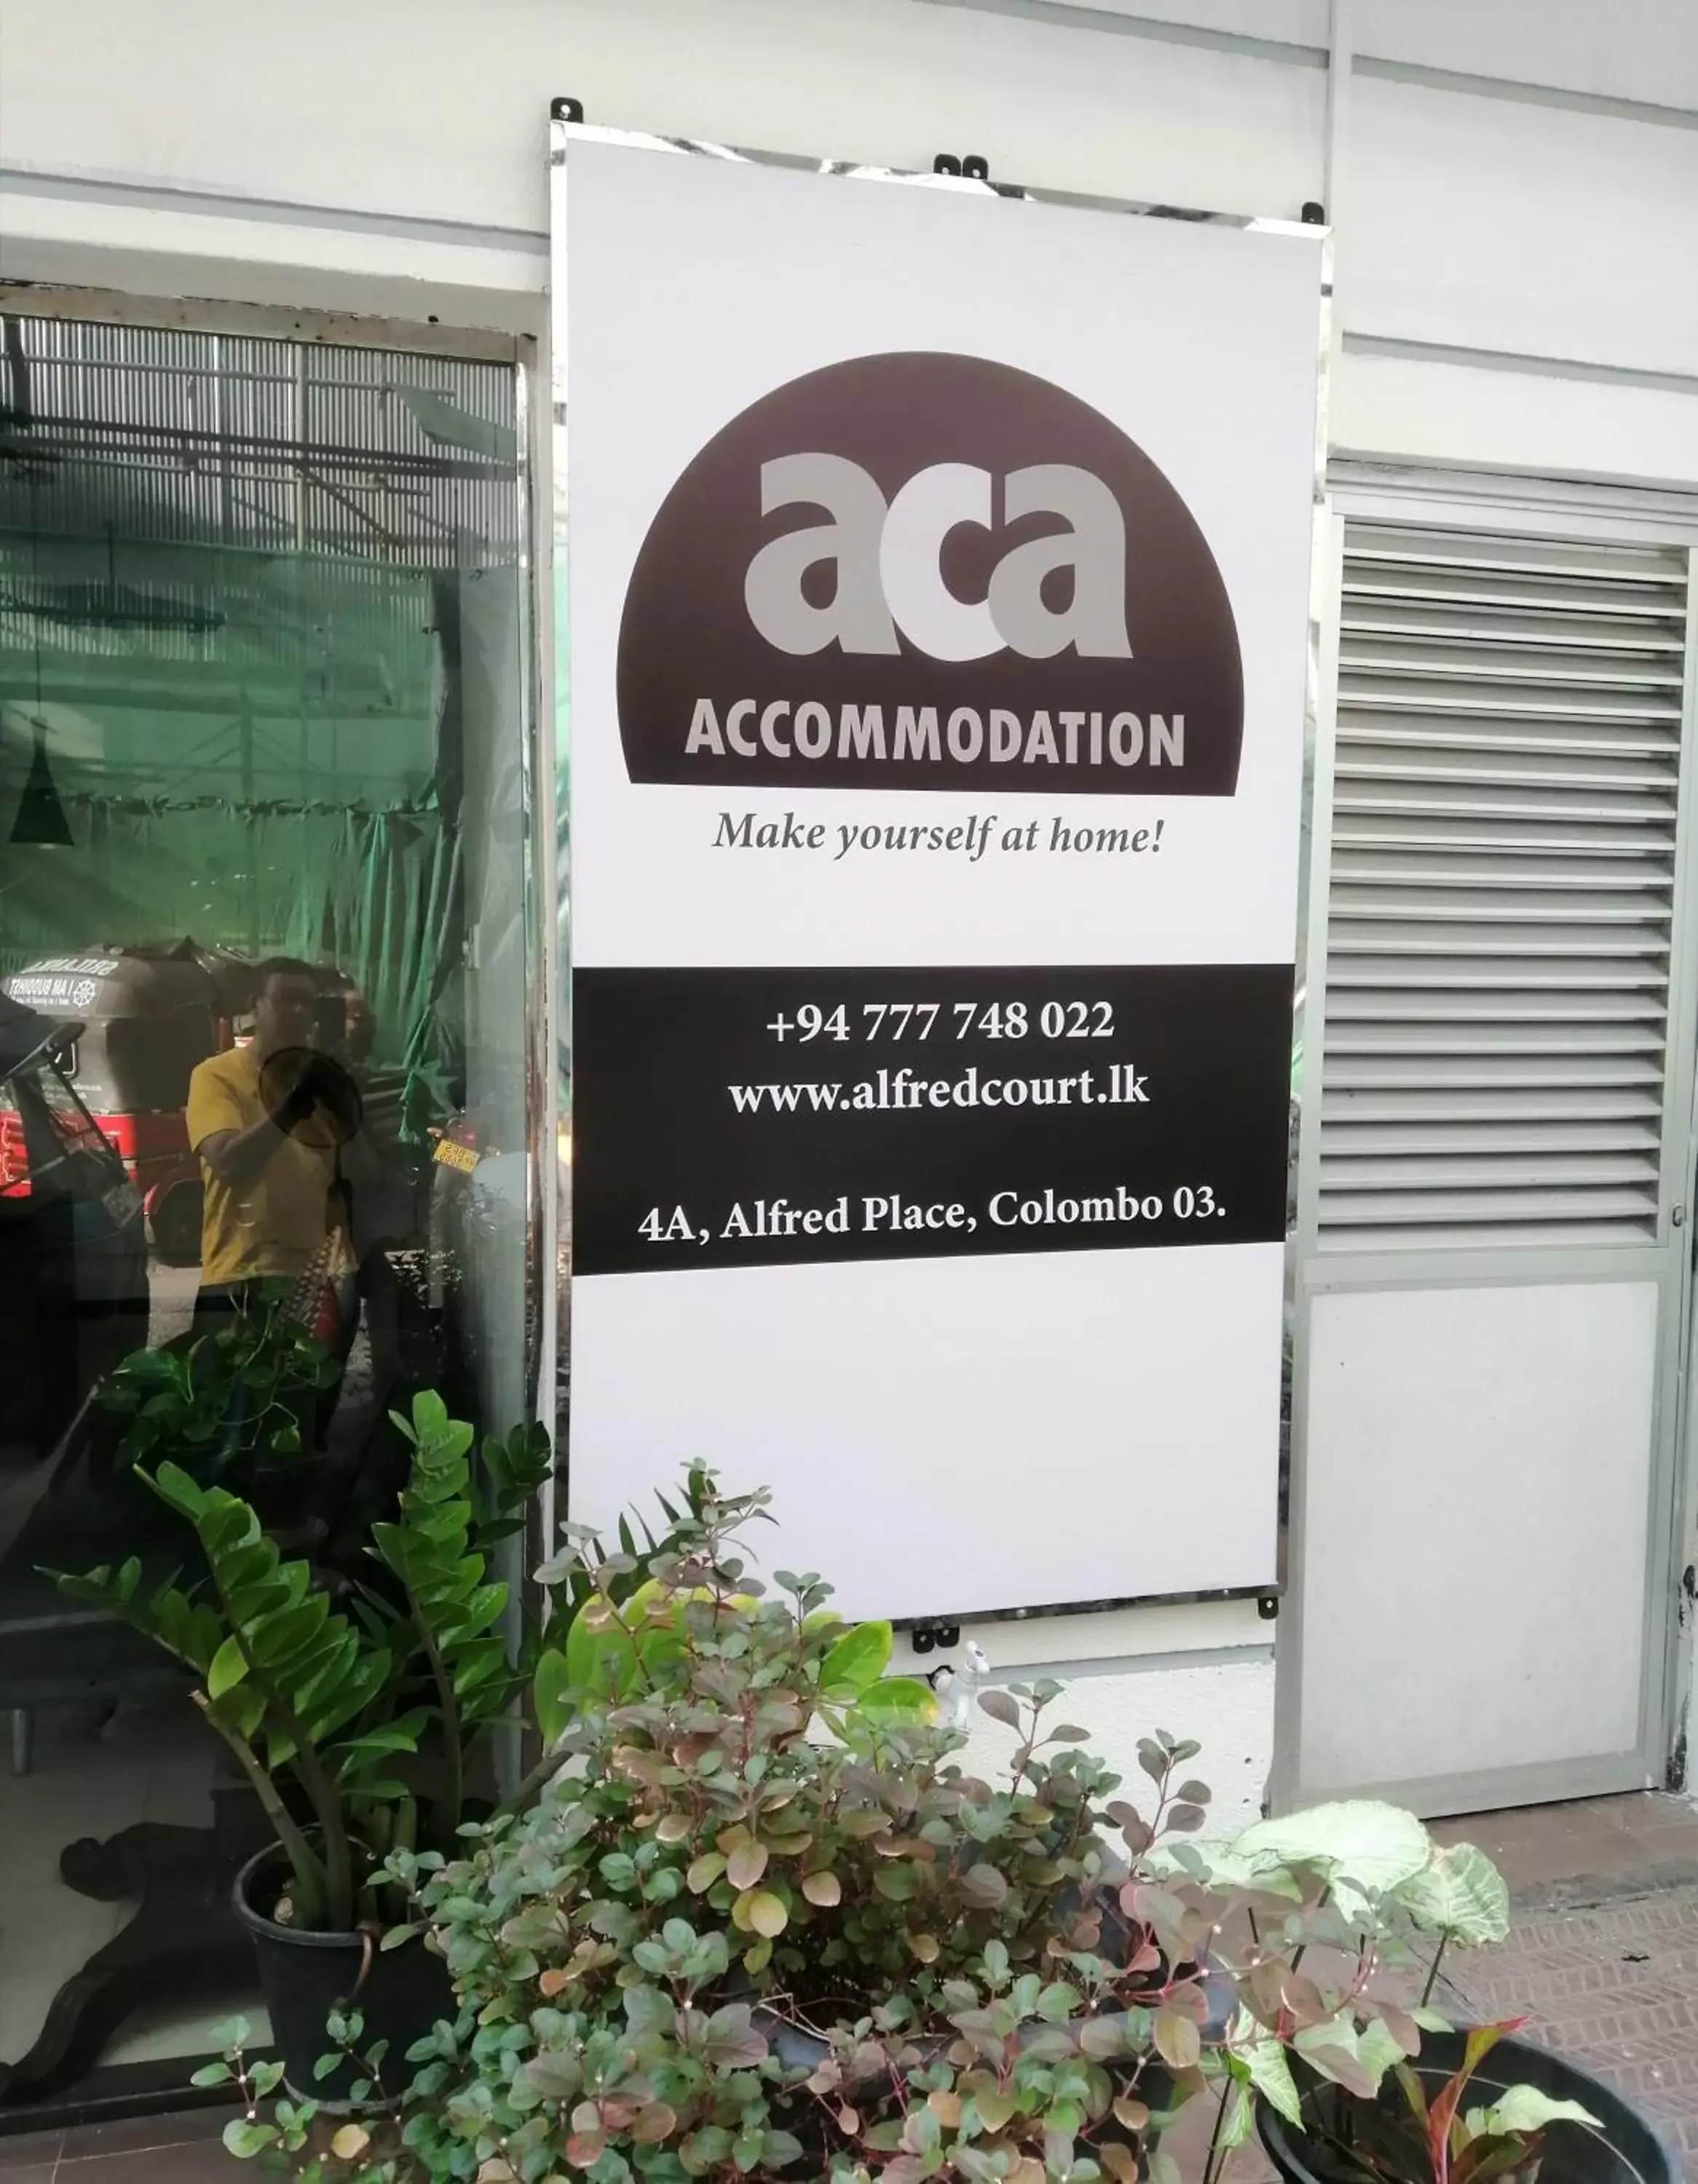 Property building in ACA Accommodation